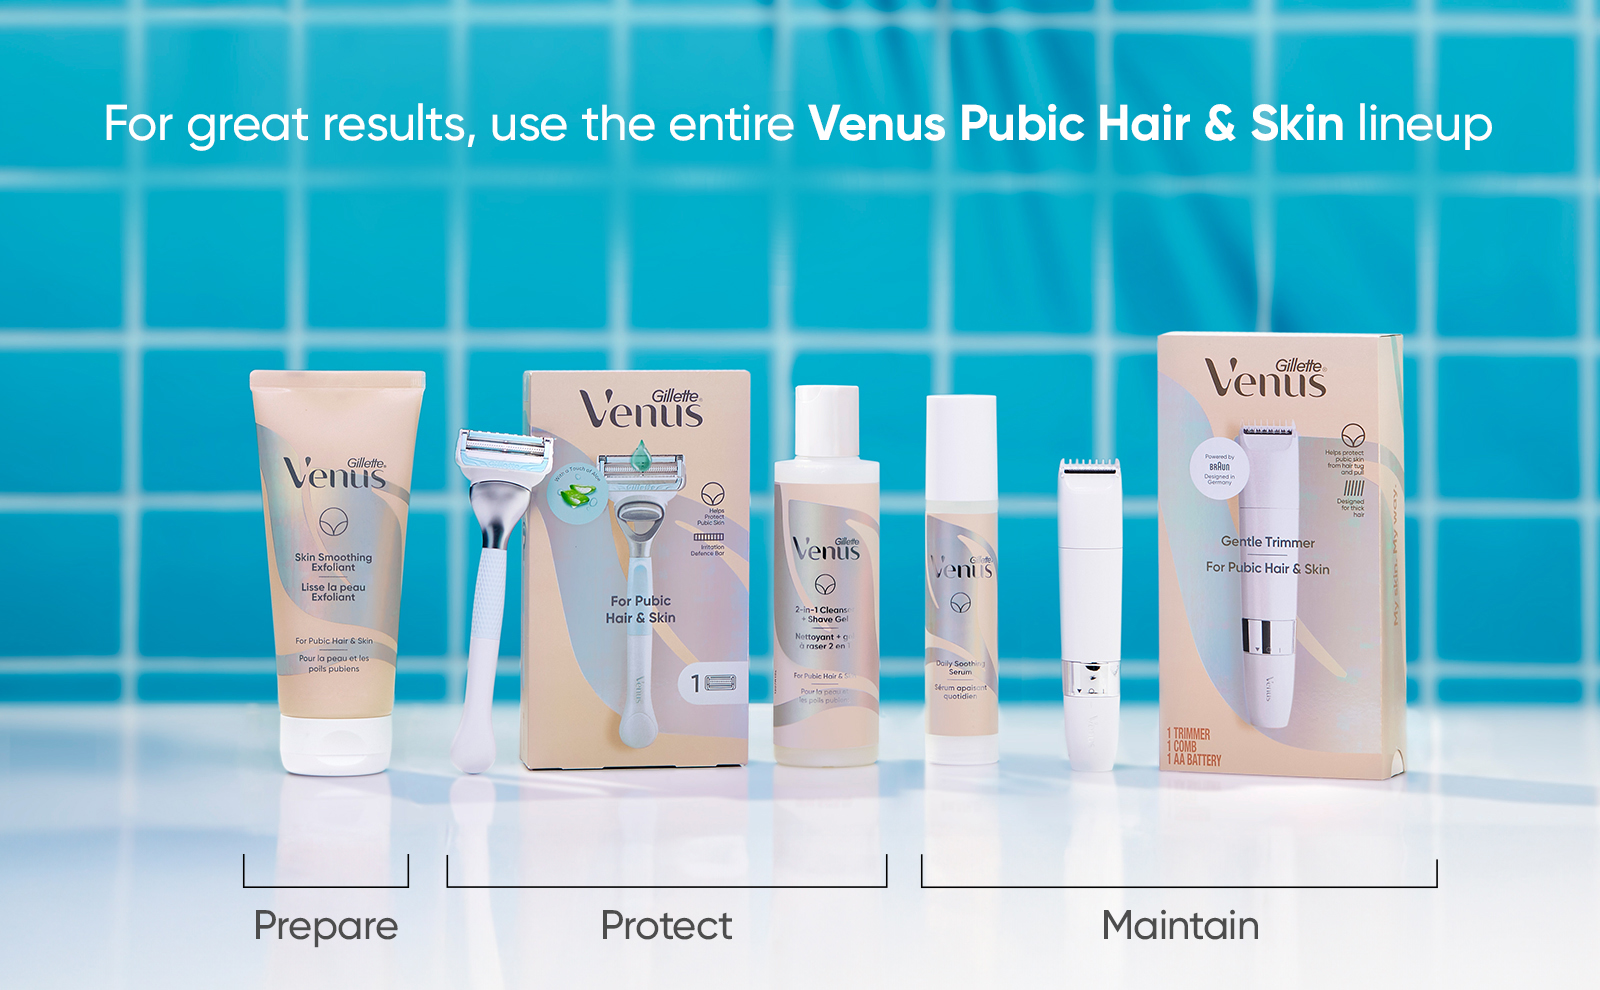 For great results, use the entire Venus Pubic Hair & Skin lineup. Prepare, protect, maintain.